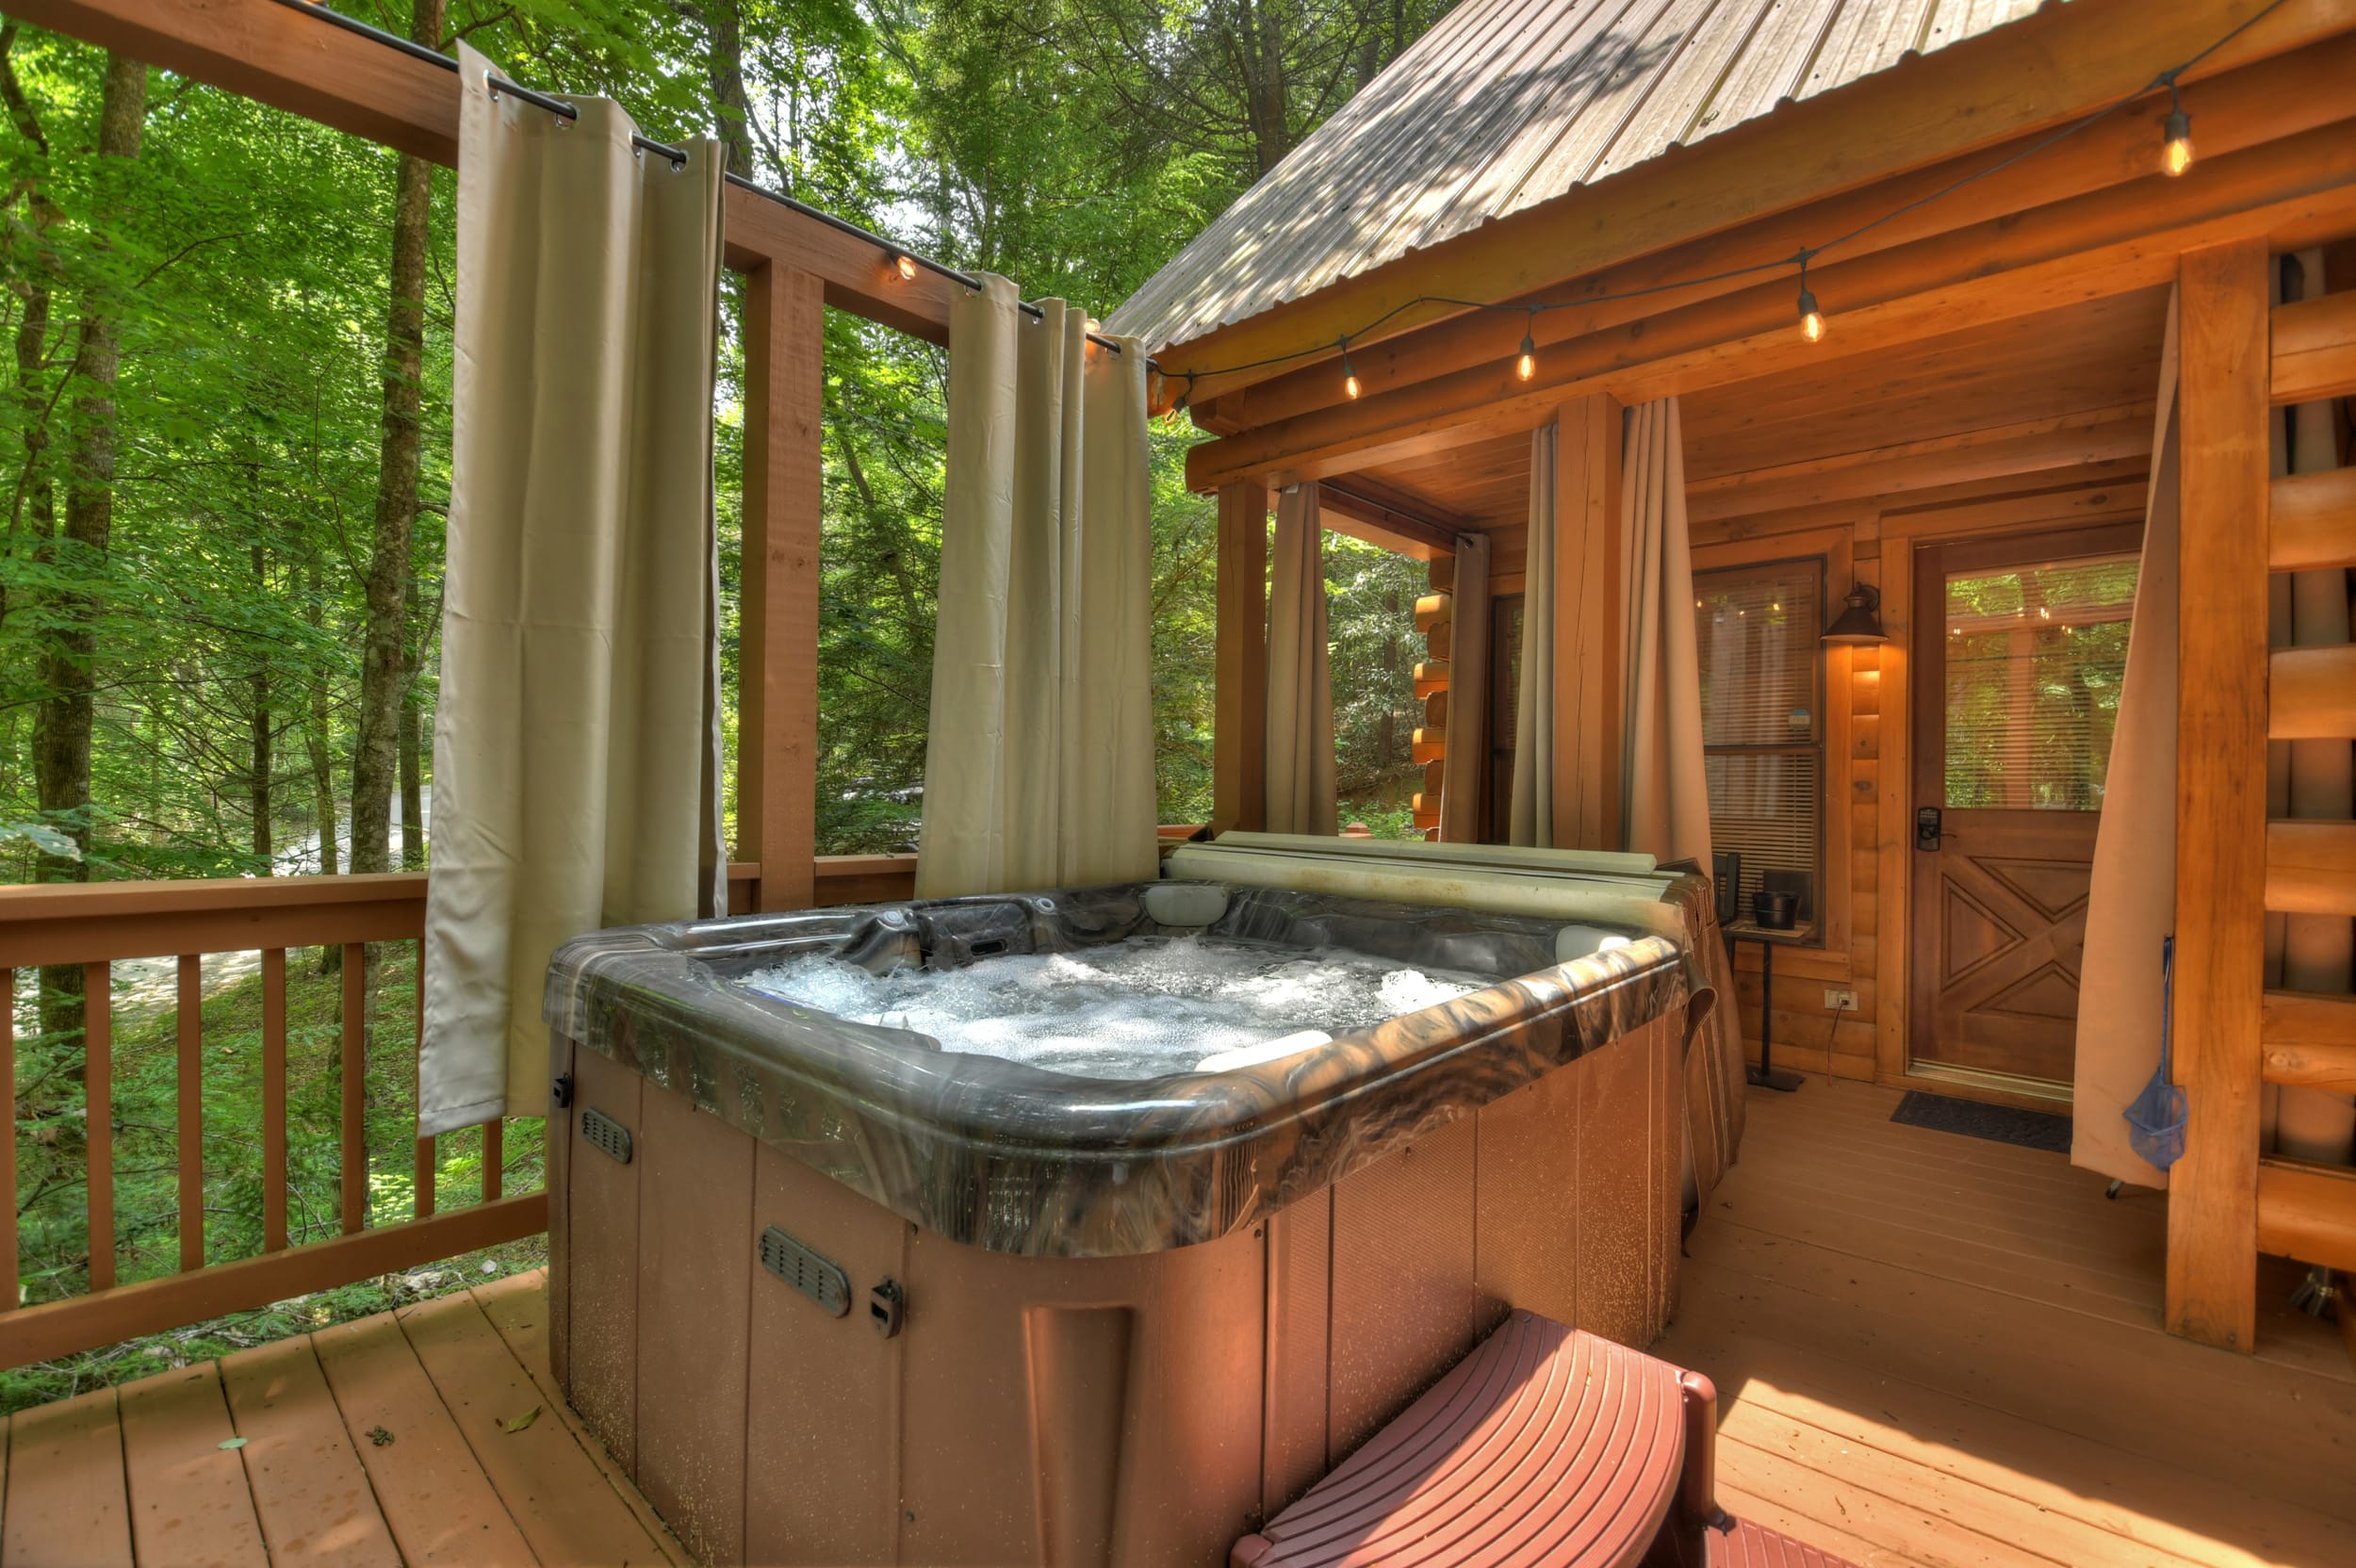 Hot tub - perfect for stargazing and relaxing